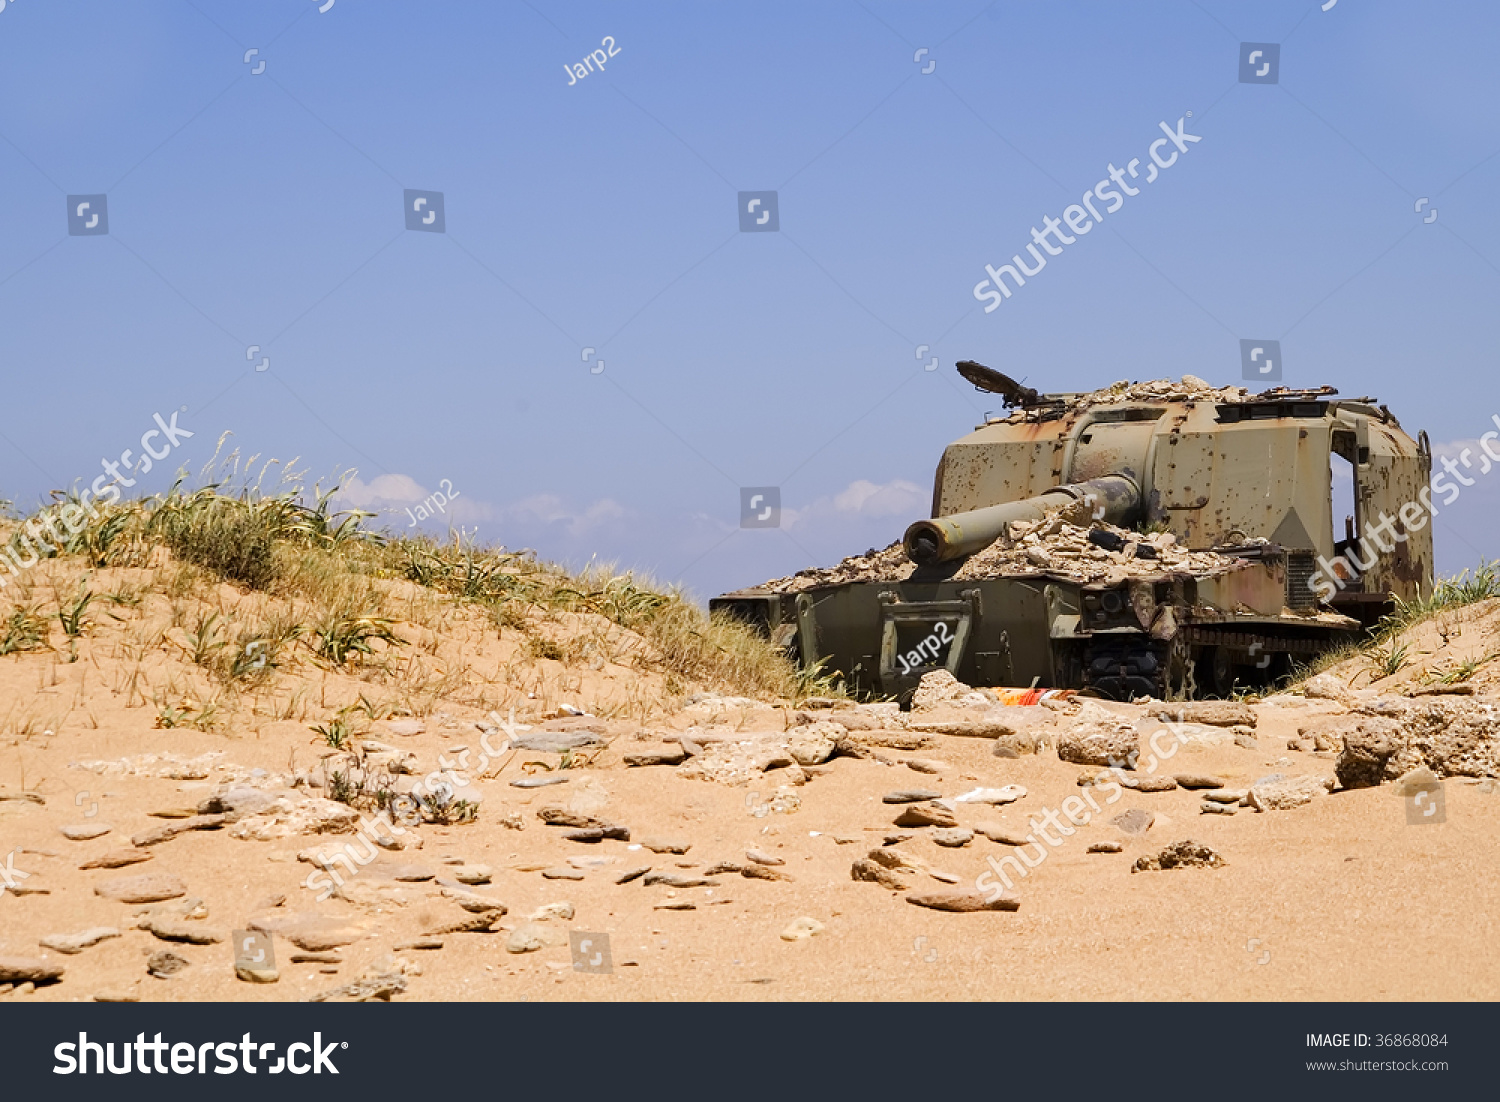 A Tank Destroyed By Enemies Shooting Stock Photo 36868084 : Shutterstock